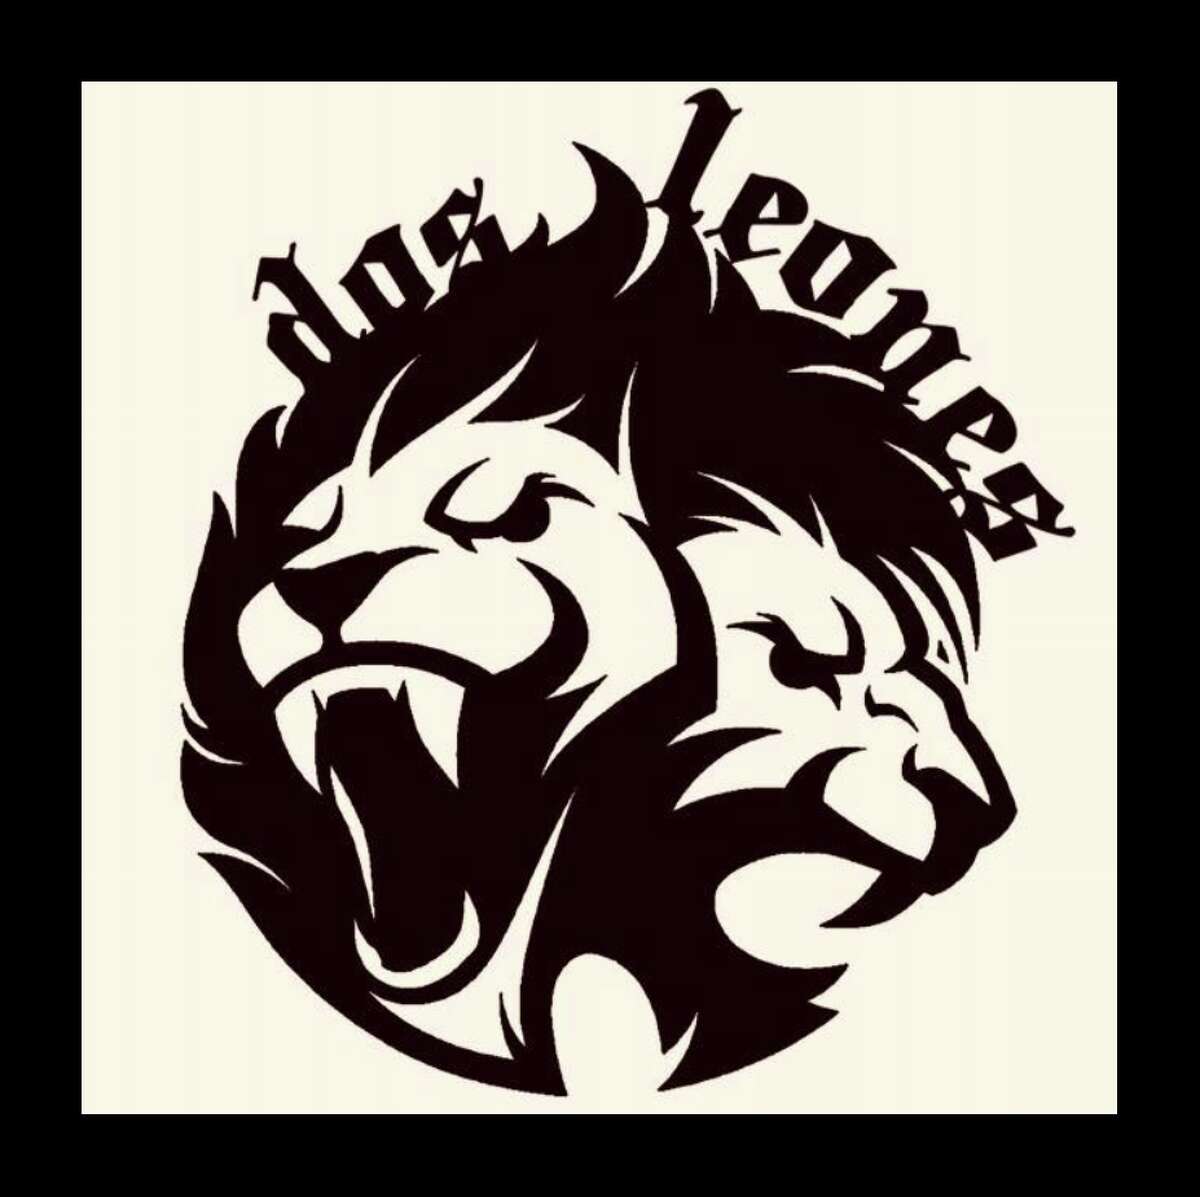 Dos Leones, which is a local band created in July 2012, is trying to gather as much support so they can win a contest that would allow them to perform in a venue in Los Angeles, California and play alongside some of the greatest acts in the music industry today. The band is asking for the public’s support in efforts to win the contest. 